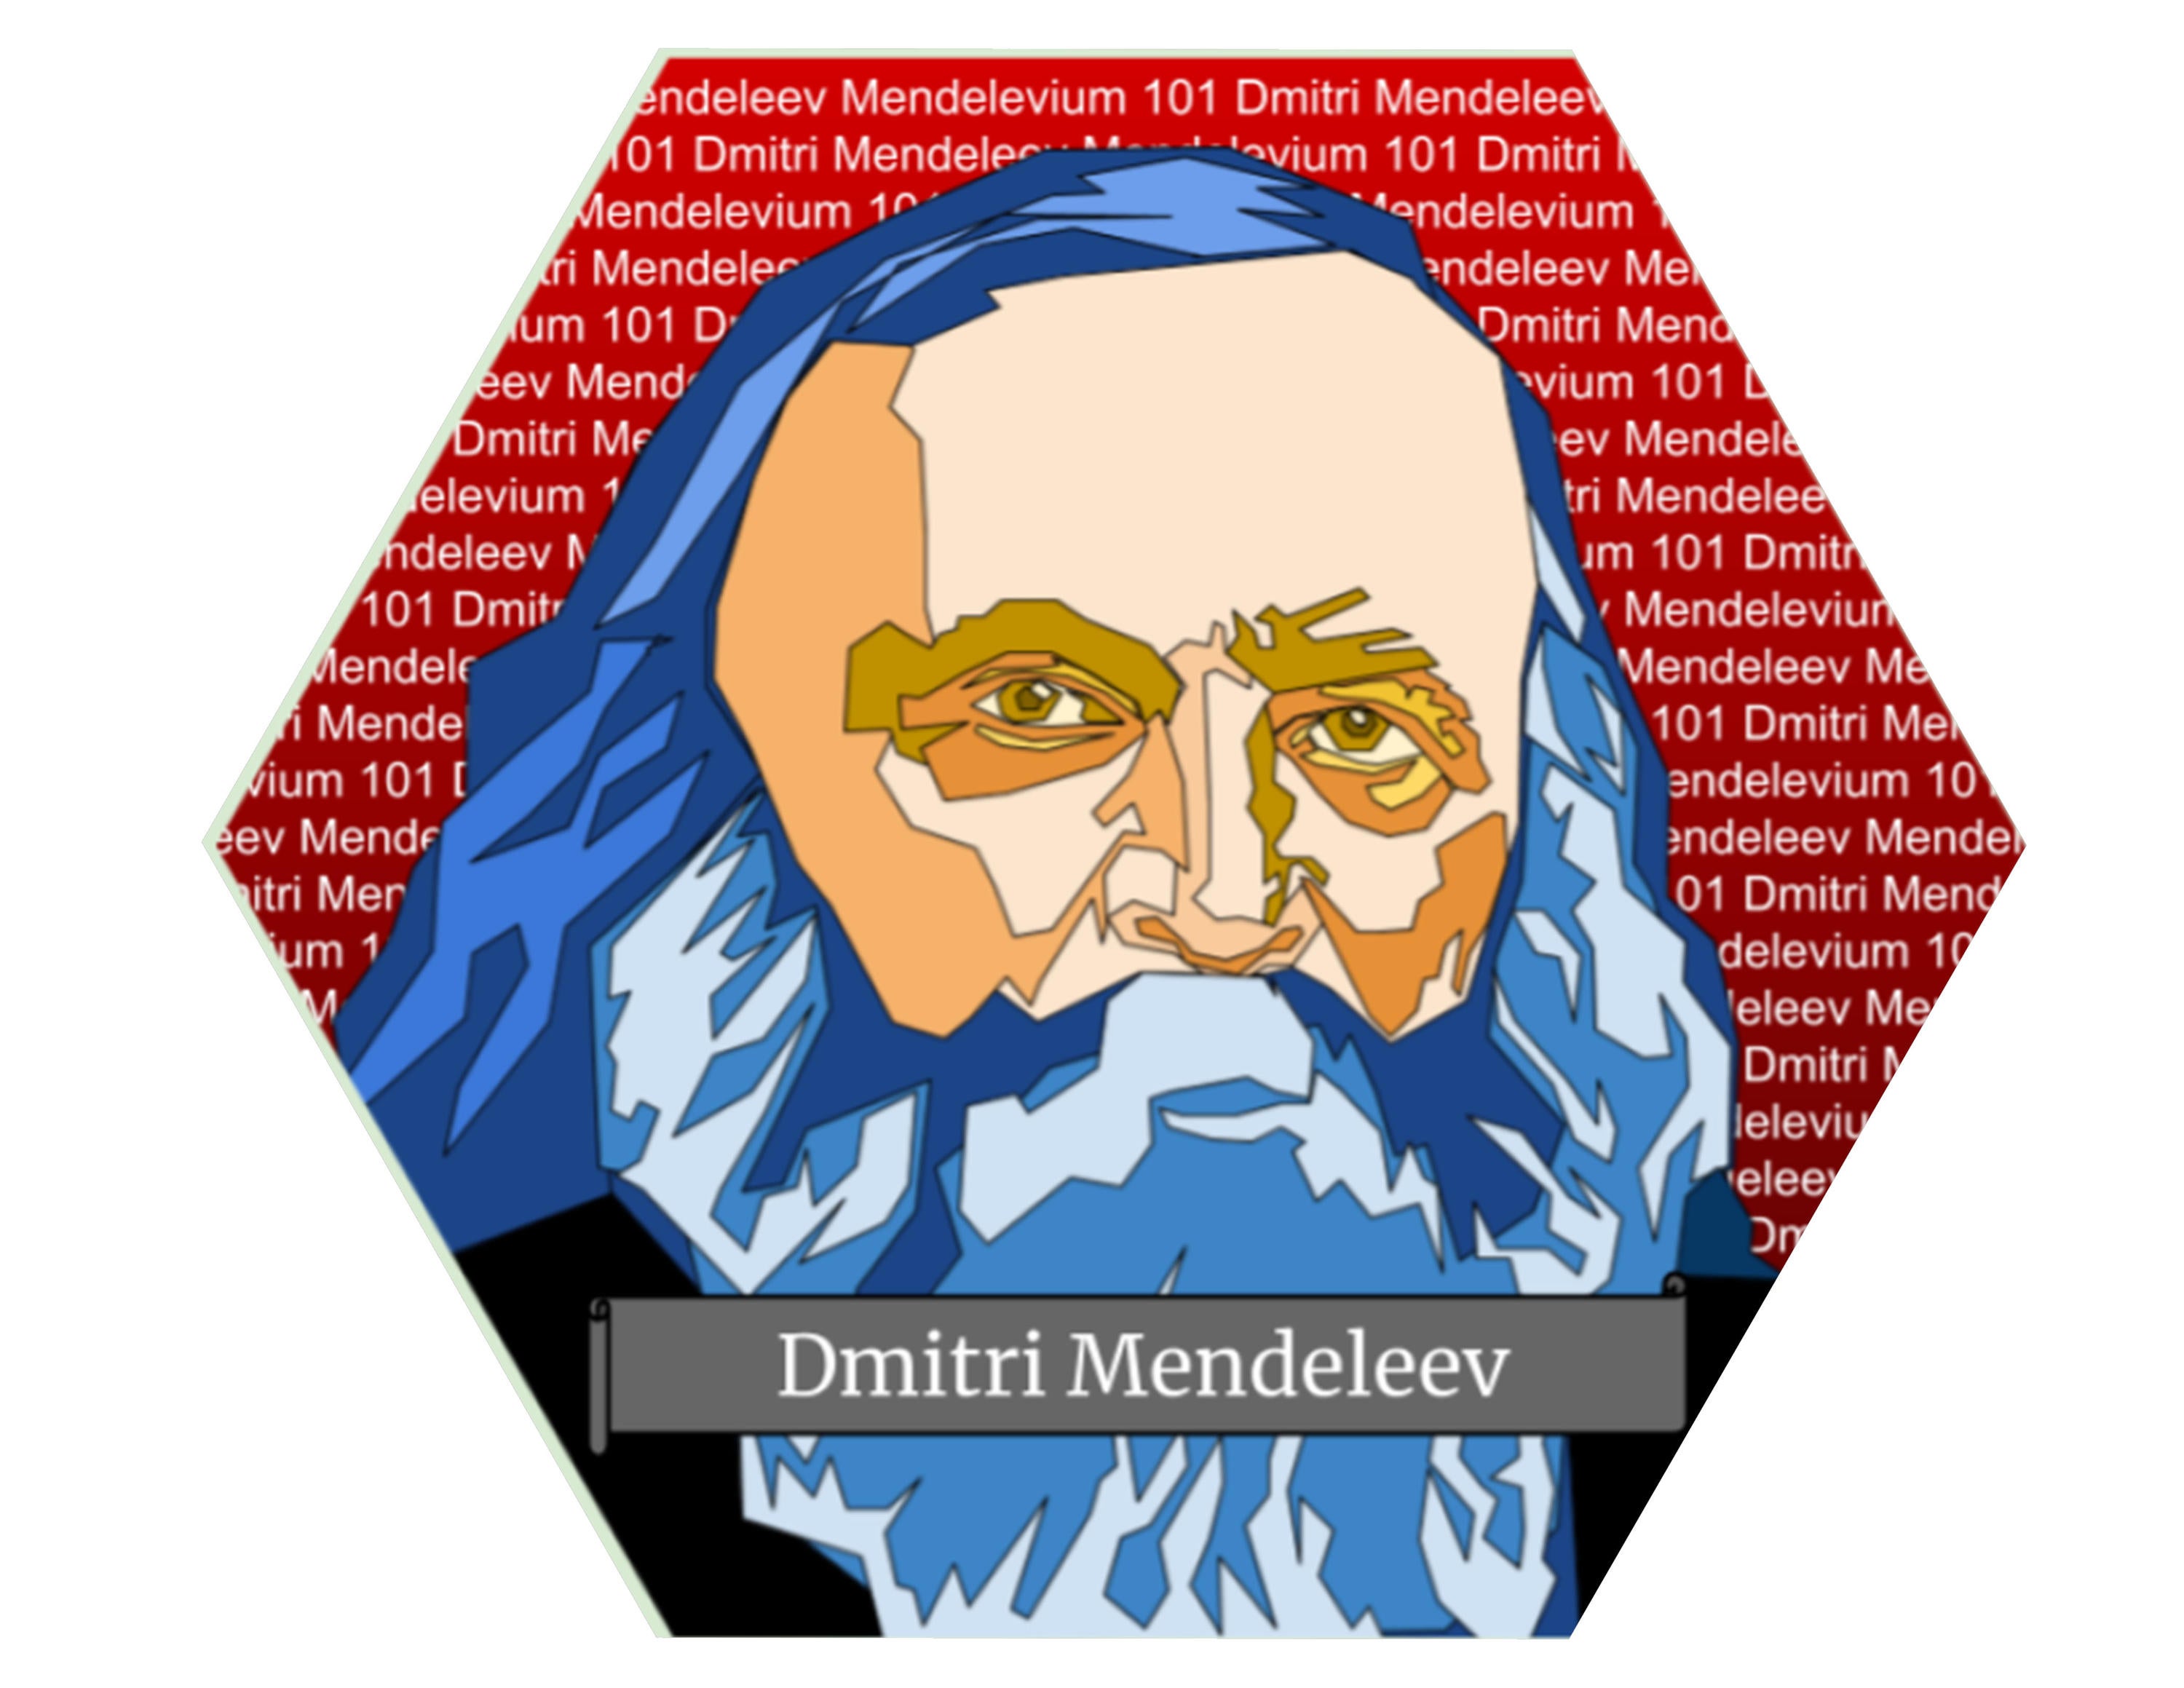 Digital portrait of Mendeleev with the words “Dmitri Mendeleev 101” written and repeated in the background